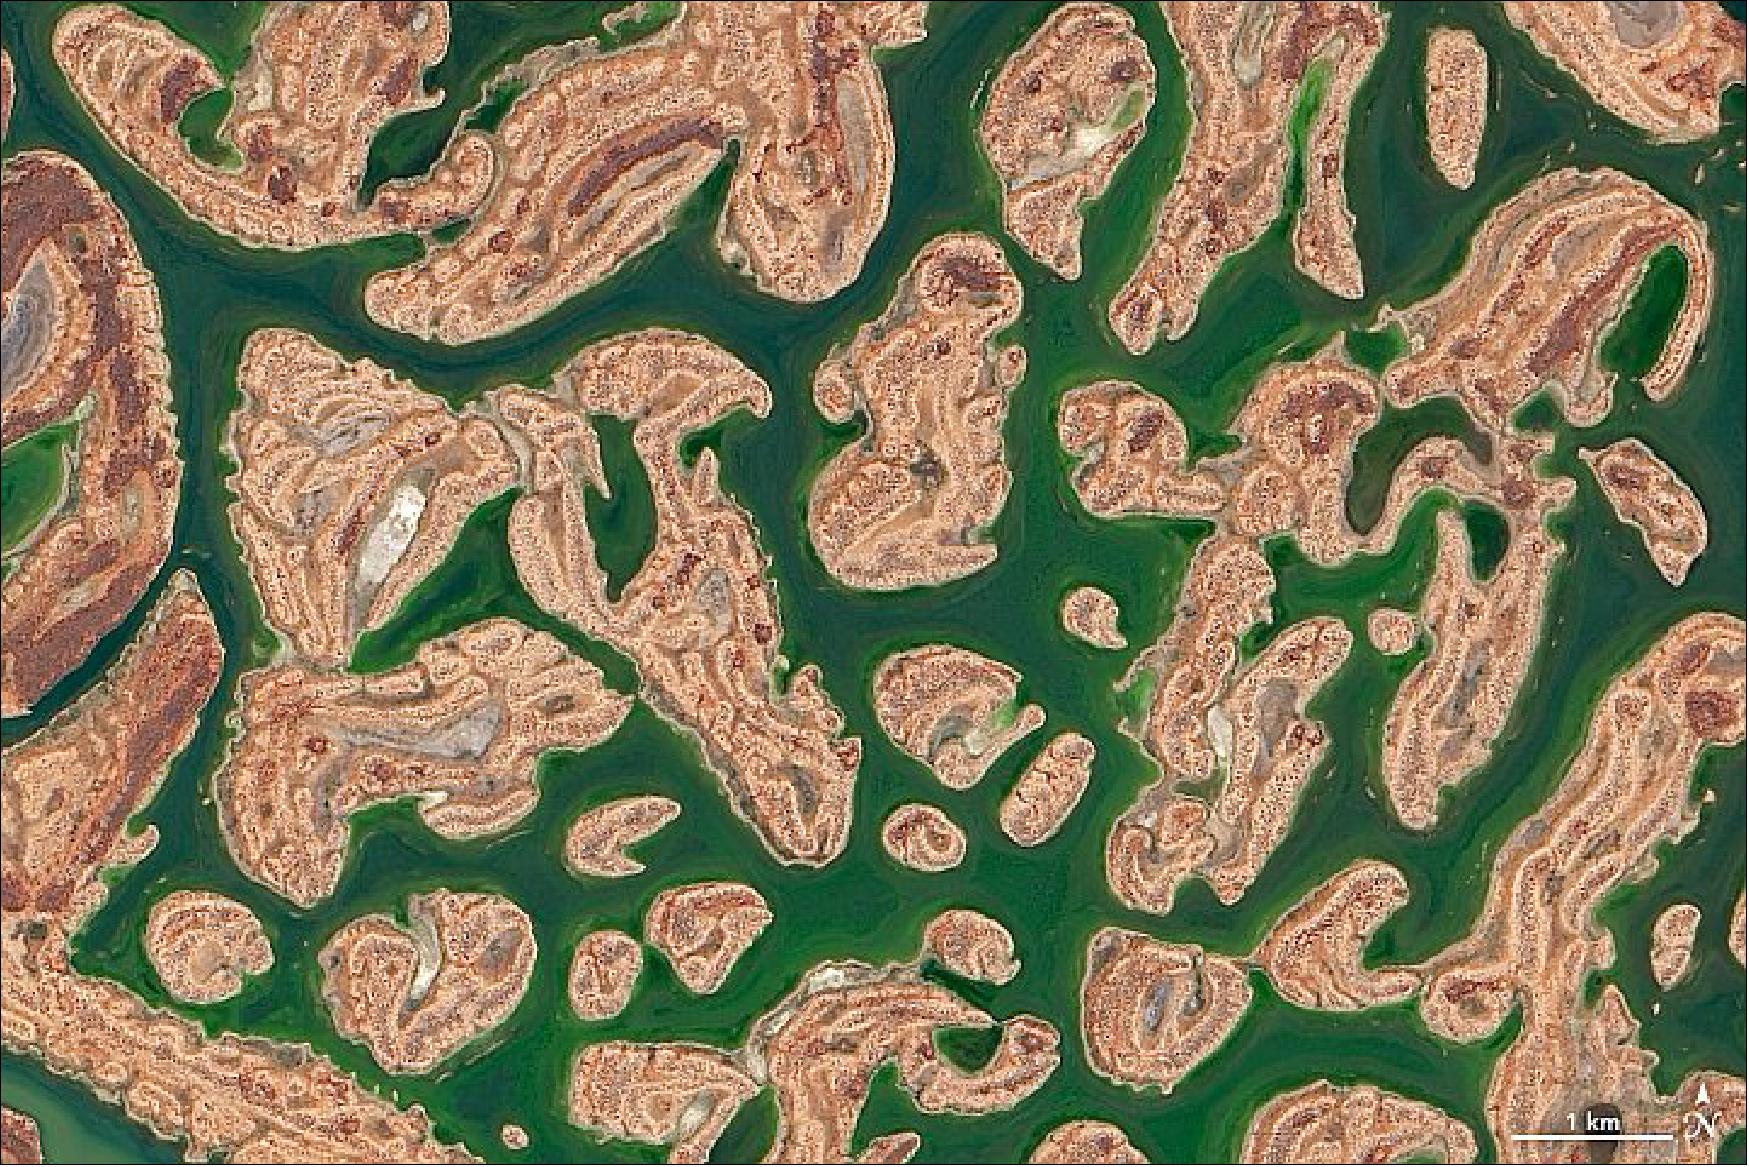 Figure 97: Detail image of Lake Carnegie. Located in the Shire of Wiluna in Western Australia, Lake Carnegie is one the country’s largest lakes. When full, it is covers about 5,700 square kilometers (2,200 square miles). In dry years, the lake is mostly a muddy marsh. The images show the lake on March 26, 2020, when it was still partially filled. The images were acquired by the Operational Land Imager (OLI) on Landsat 8 (image credit: NASA Earth Observatory, images by Lauren Dauphin, using Landsat data from the U.S. Geological Survey. Story by Kasha Patel)